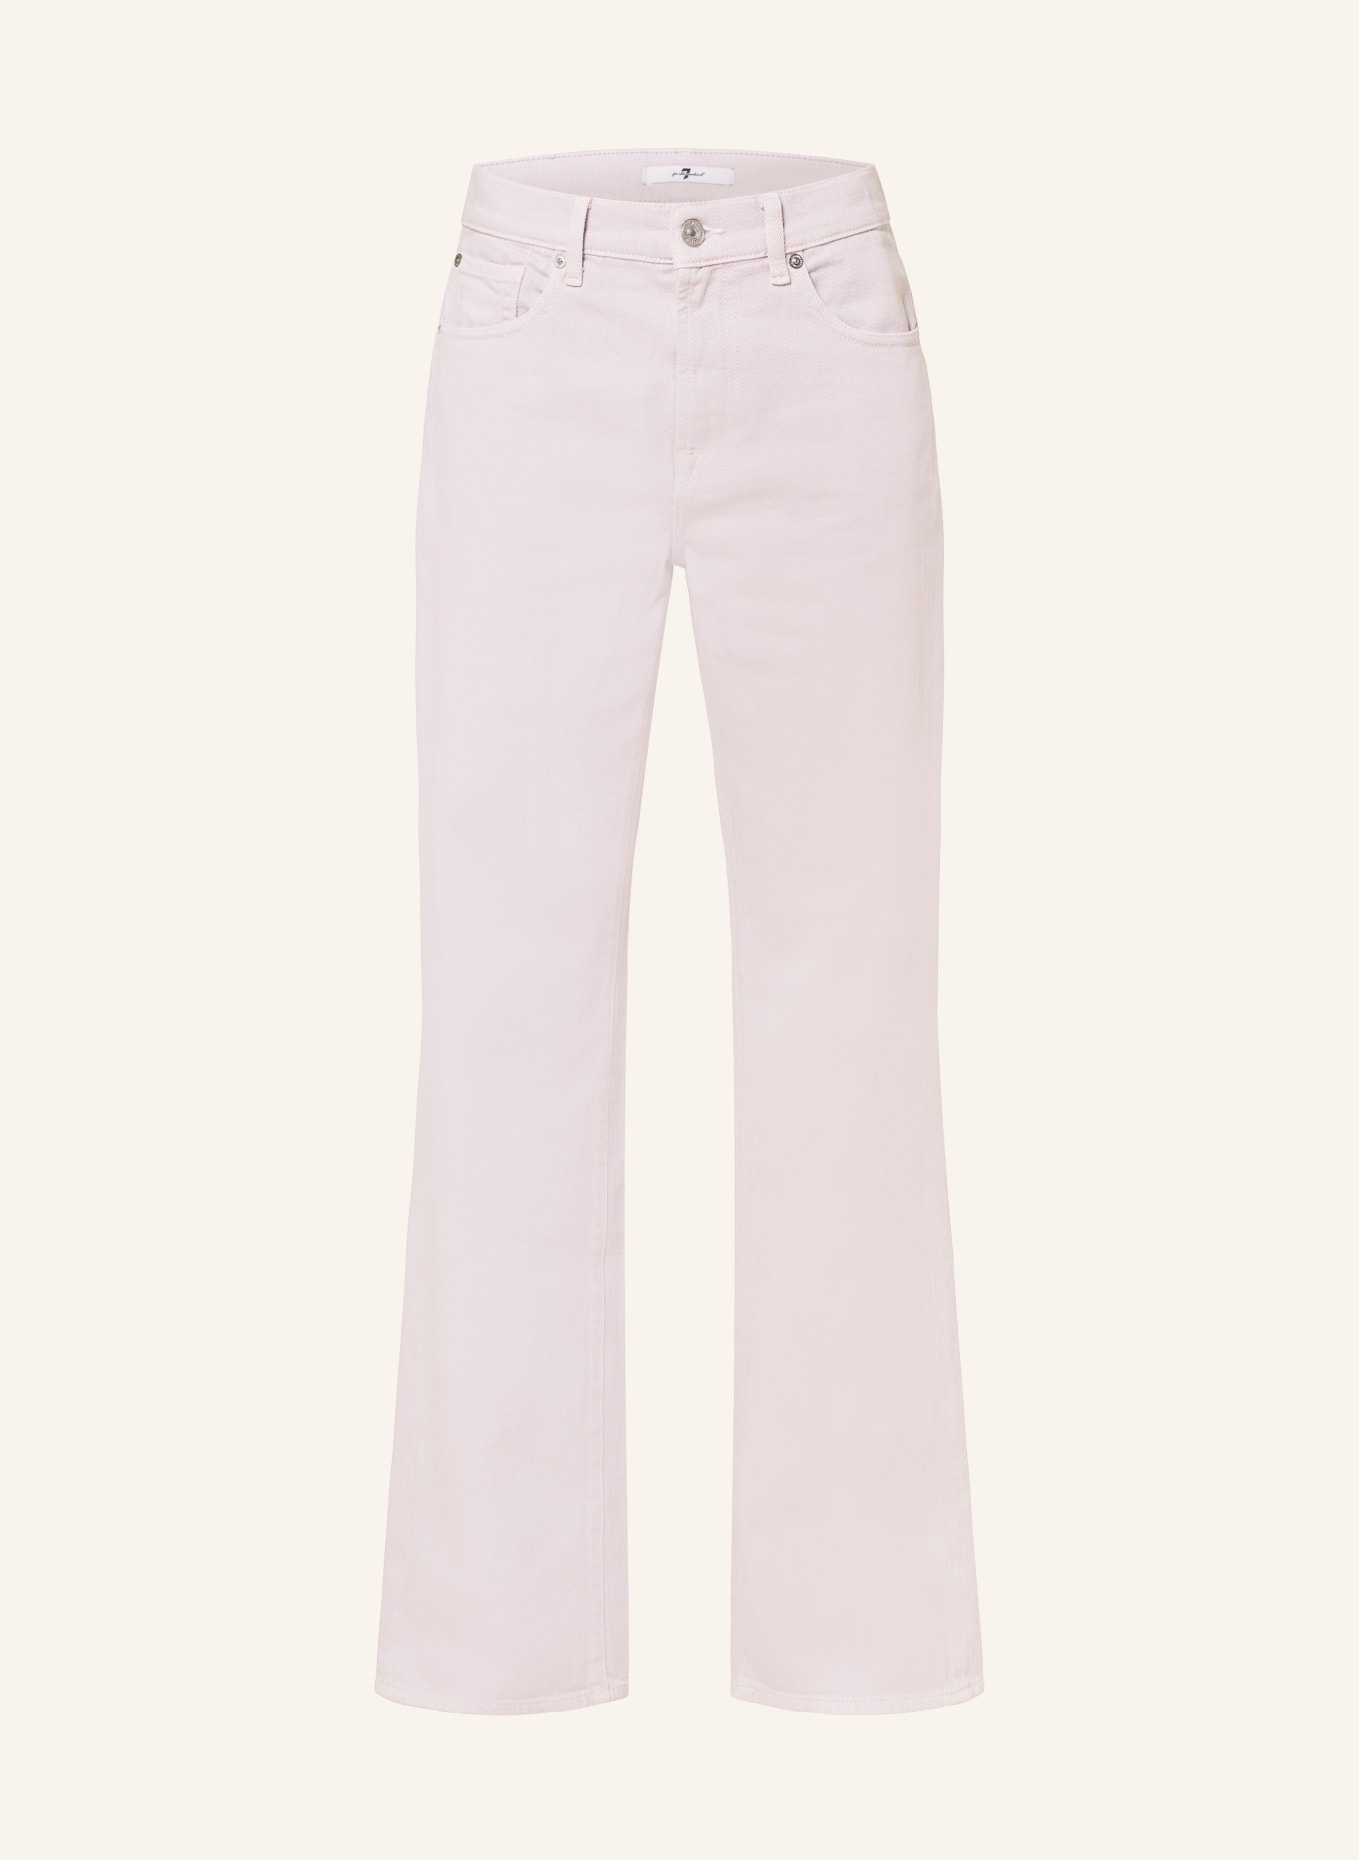 7 for all mankind Flared Jeans, Farbe: VIOLET (Bild 1)